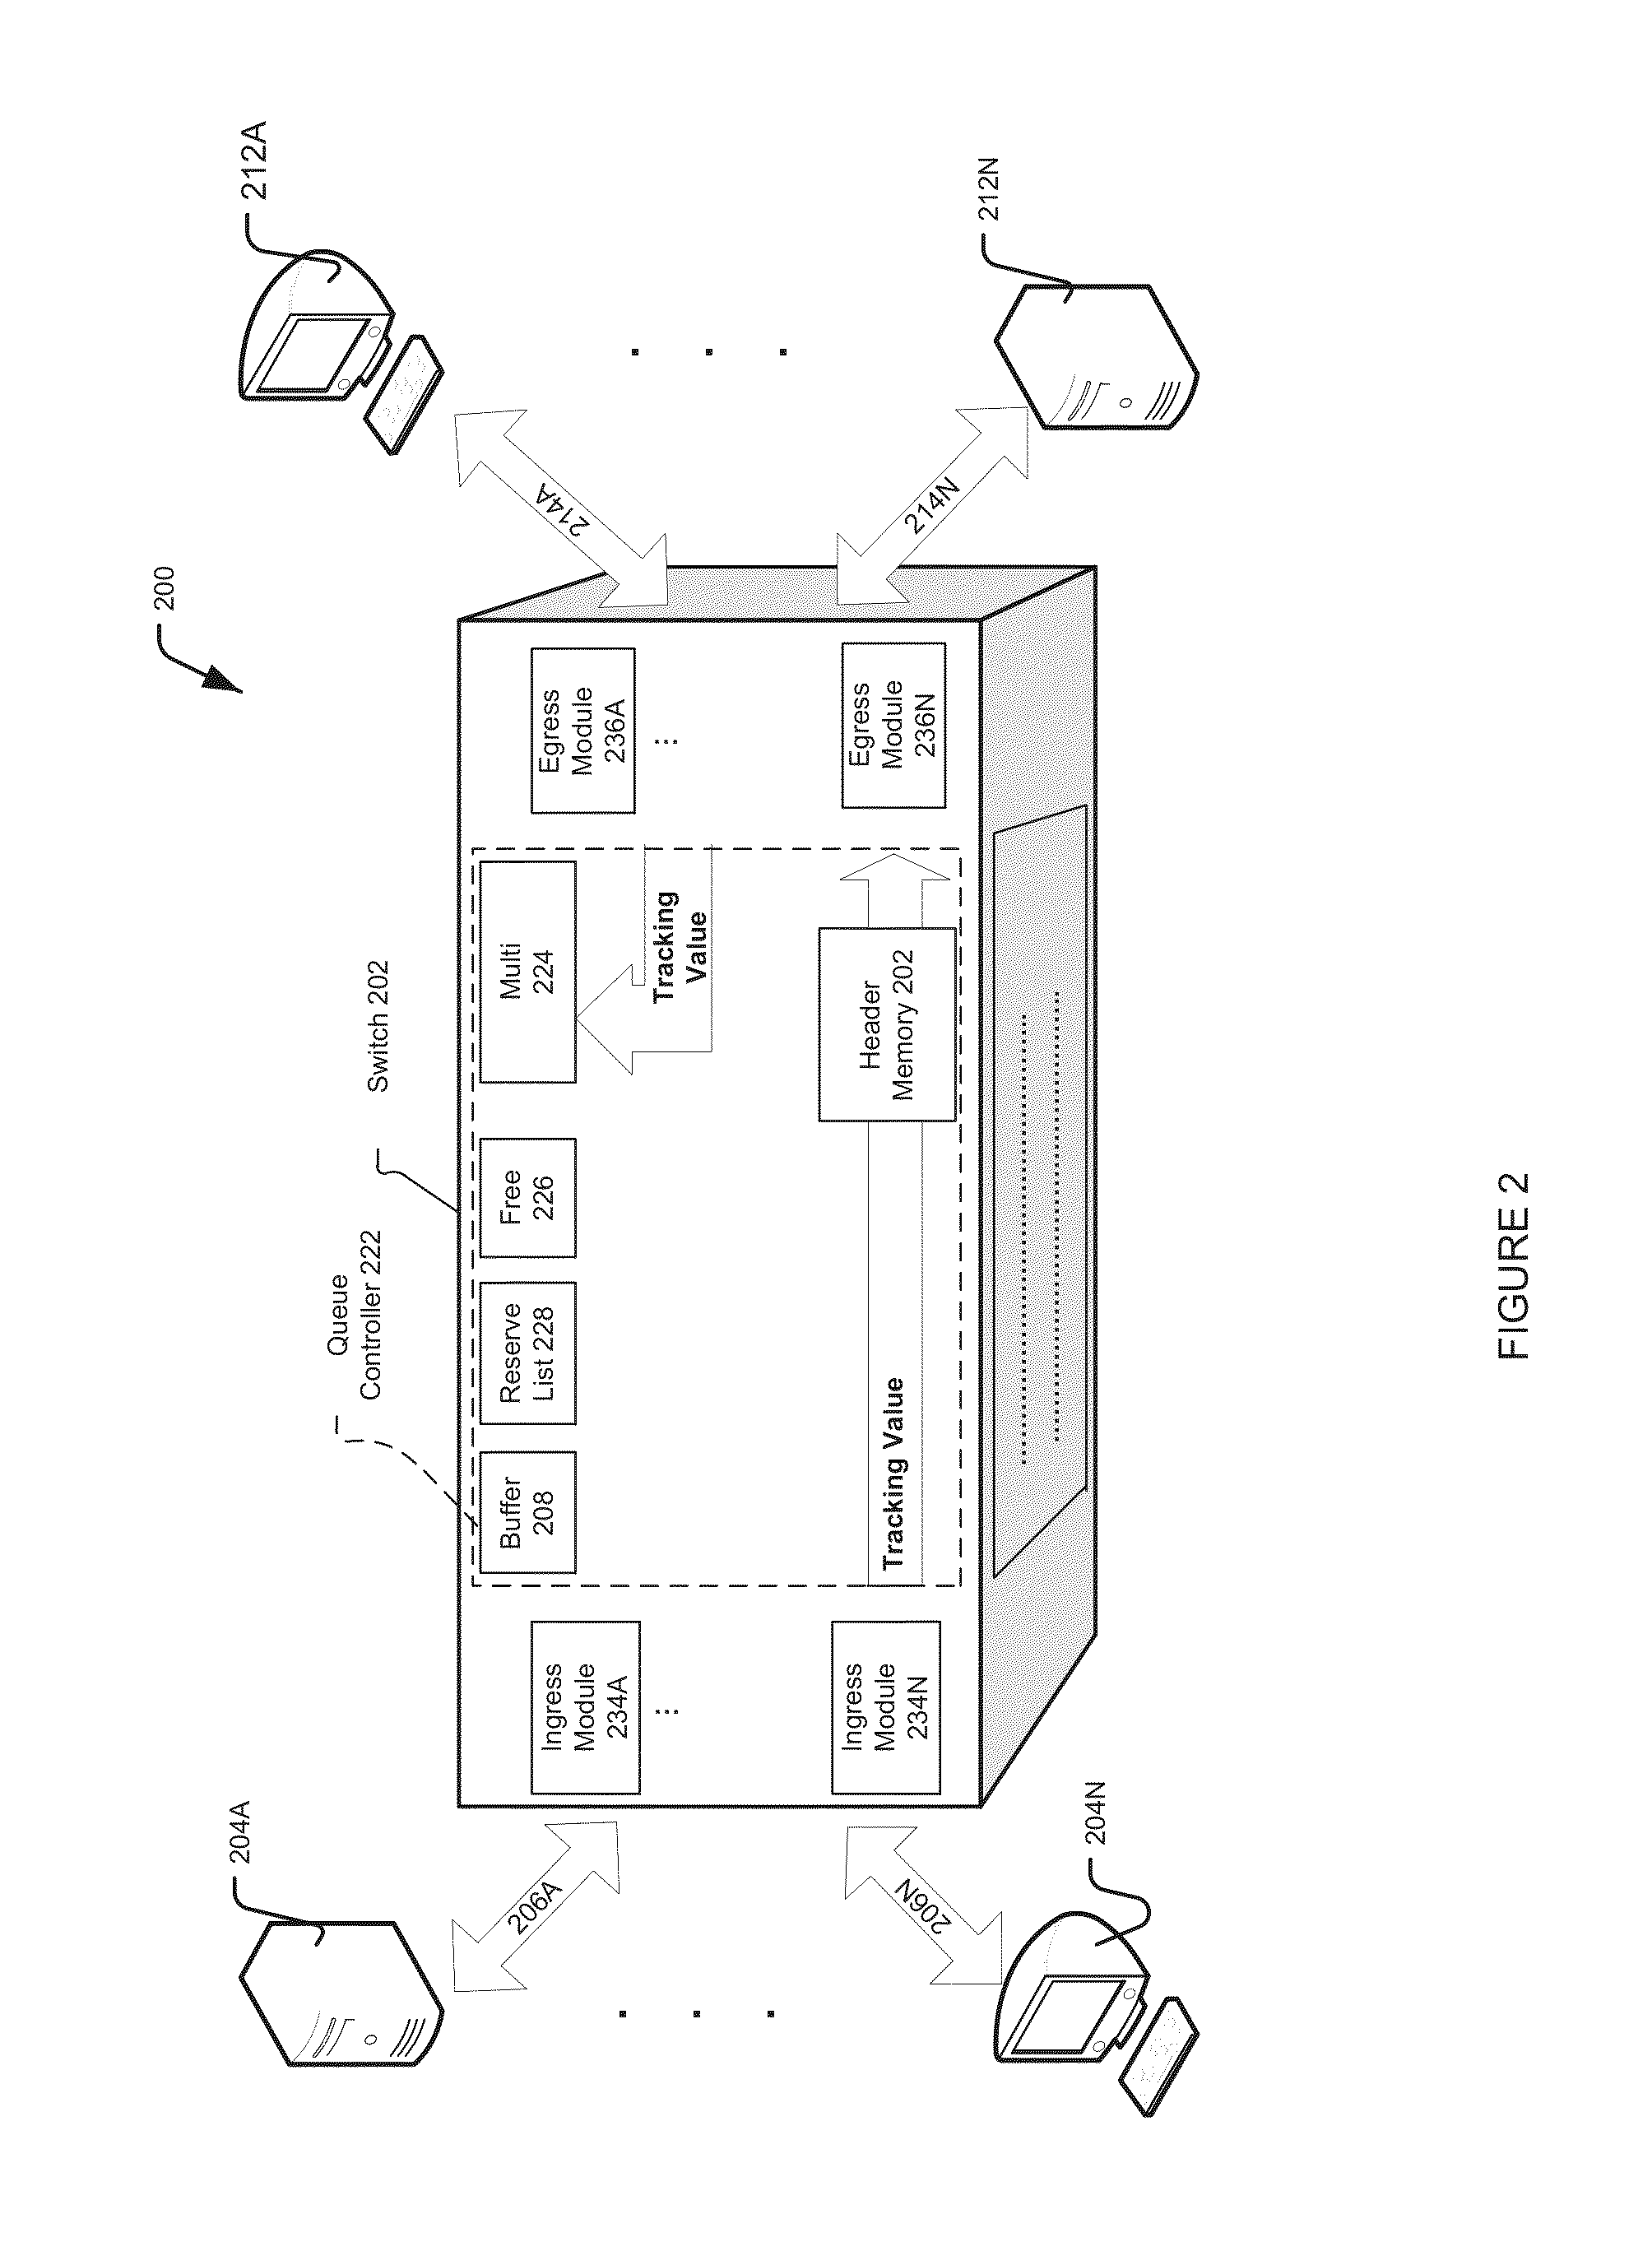 Device and process for efficient multicasting